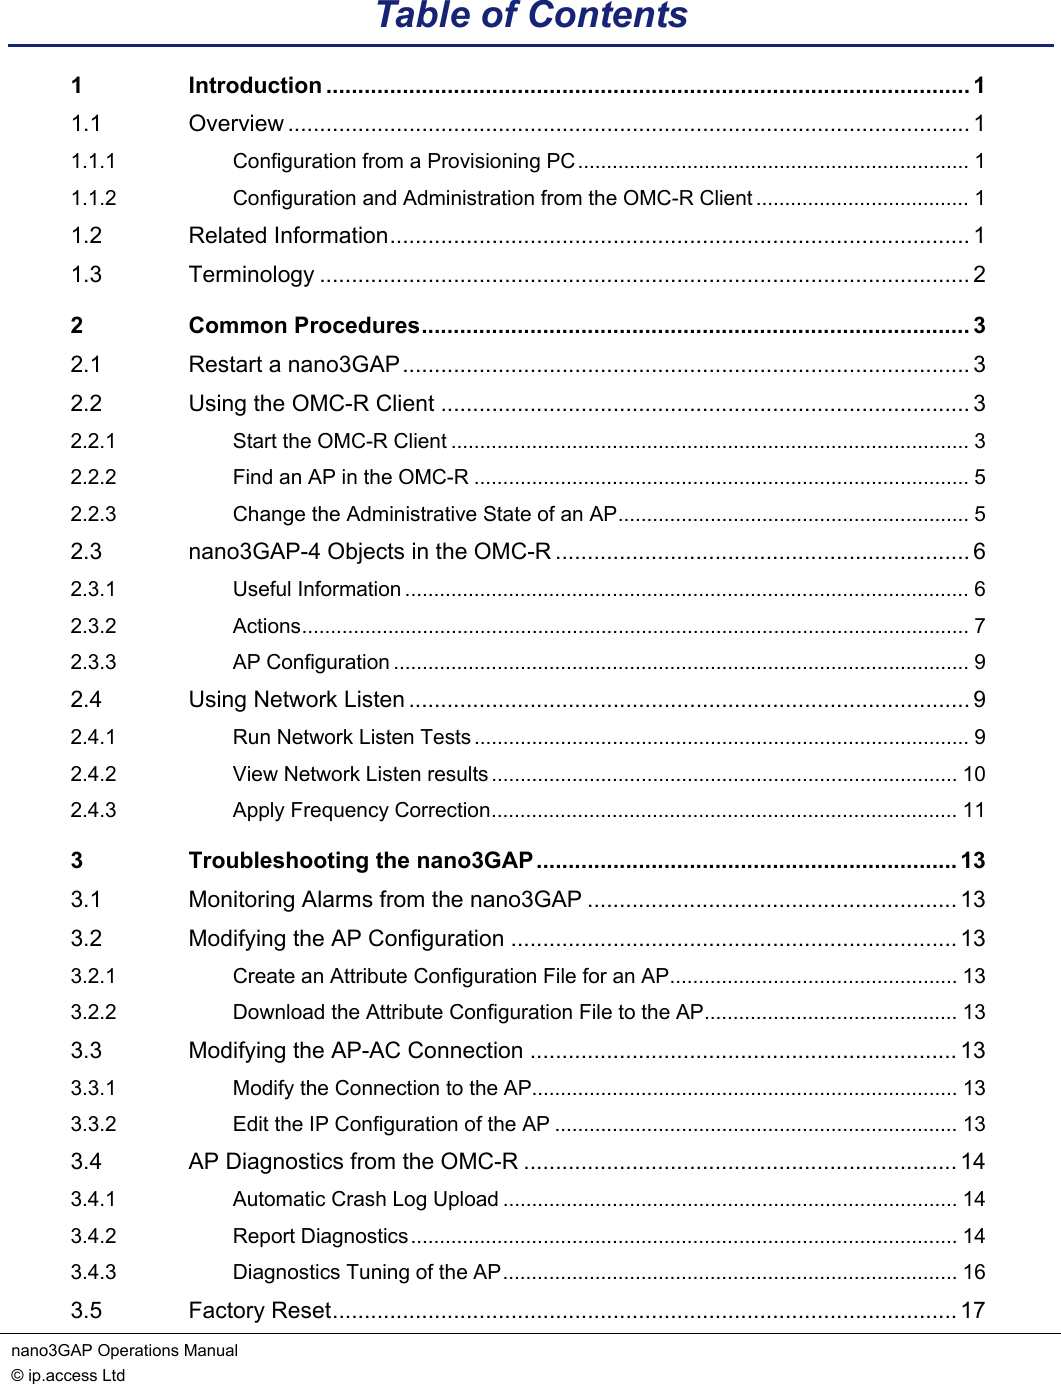 nano3GAP Operations Manual   © ip.access Ltd    Table of Contents 1 Introduction ..................................................................................................... 1 1.1 Overview ........................................................................................................... 1 1.1.1 Configuration from a Provisioning PC.................................................................... 1 1.1.2 Configuration and Administration from the OMC-R Client ..................................... 1 1.2 Related Information........................................................................................... 1 1.3 Terminology ...................................................................................................... 2 2 Common Procedures...................................................................................... 3 2.1 Restart a nano3GAP......................................................................................... 3 2.2 Using the OMC-R Client ................................................................................... 3 2.2.1 Start the OMC-R Client .......................................................................................... 3 2.2.2 Find an AP in the OMC-R ...................................................................................... 5 2.2.3 Change the Administrative State of an AP............................................................. 5 2.3 nano3GAP-4 Objects in the OMC-R ................................................................. 6 2.3.1 Useful Information .................................................................................................. 6 2.3.2 Actions.................................................................................................................... 7 2.3.3 AP Configuration .................................................................................................... 9 2.4 Using Network Listen ........................................................................................ 9 2.4.1 Run Network Listen Tests ...................................................................................... 9 2.4.2 View Network Listen results ................................................................................. 10 2.4.3 Apply Frequency Correction................................................................................. 11 3 Troubleshooting the nano3GAP.................................................................. 13 3.1 Monitoring Alarms from the nano3GAP .......................................................... 13 3.2 Modifying the AP Configuration ...................................................................... 13 3.2.1 Create an Attribute Configuration File for an AP.................................................. 13 3.2.2 Download the Attribute Configuration File to the AP............................................ 13 3.3 Modifying the AP-AC Connection ................................................................... 13 3.3.1 Modify the Connection to the AP.......................................................................... 13 3.3.2 Edit the IP Configuration of the AP ...................................................................... 13 3.4 AP Diagnostics from the OMC-R .................................................................... 14 3.4.1 Automatic Crash Log Upload ............................................................................... 14 3.4.2 Report Diagnostics............................................................................................... 14 3.4.3 Diagnostics Tuning of the AP............................................................................... 16 3.5 Factory Reset.................................................................................................. 17 